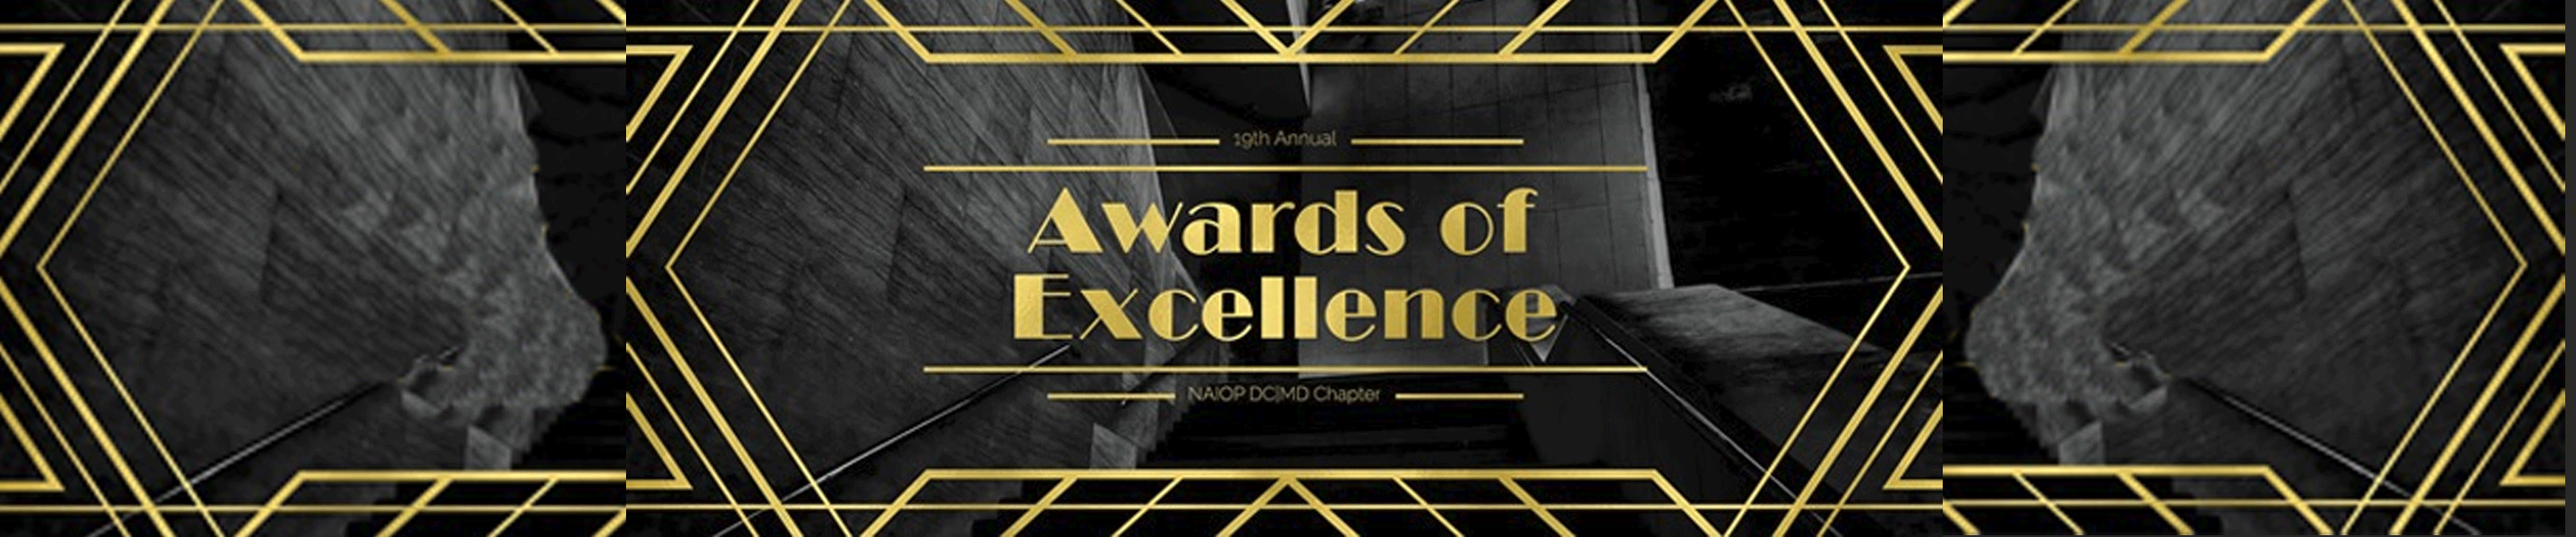 Awards of Excellence 2019